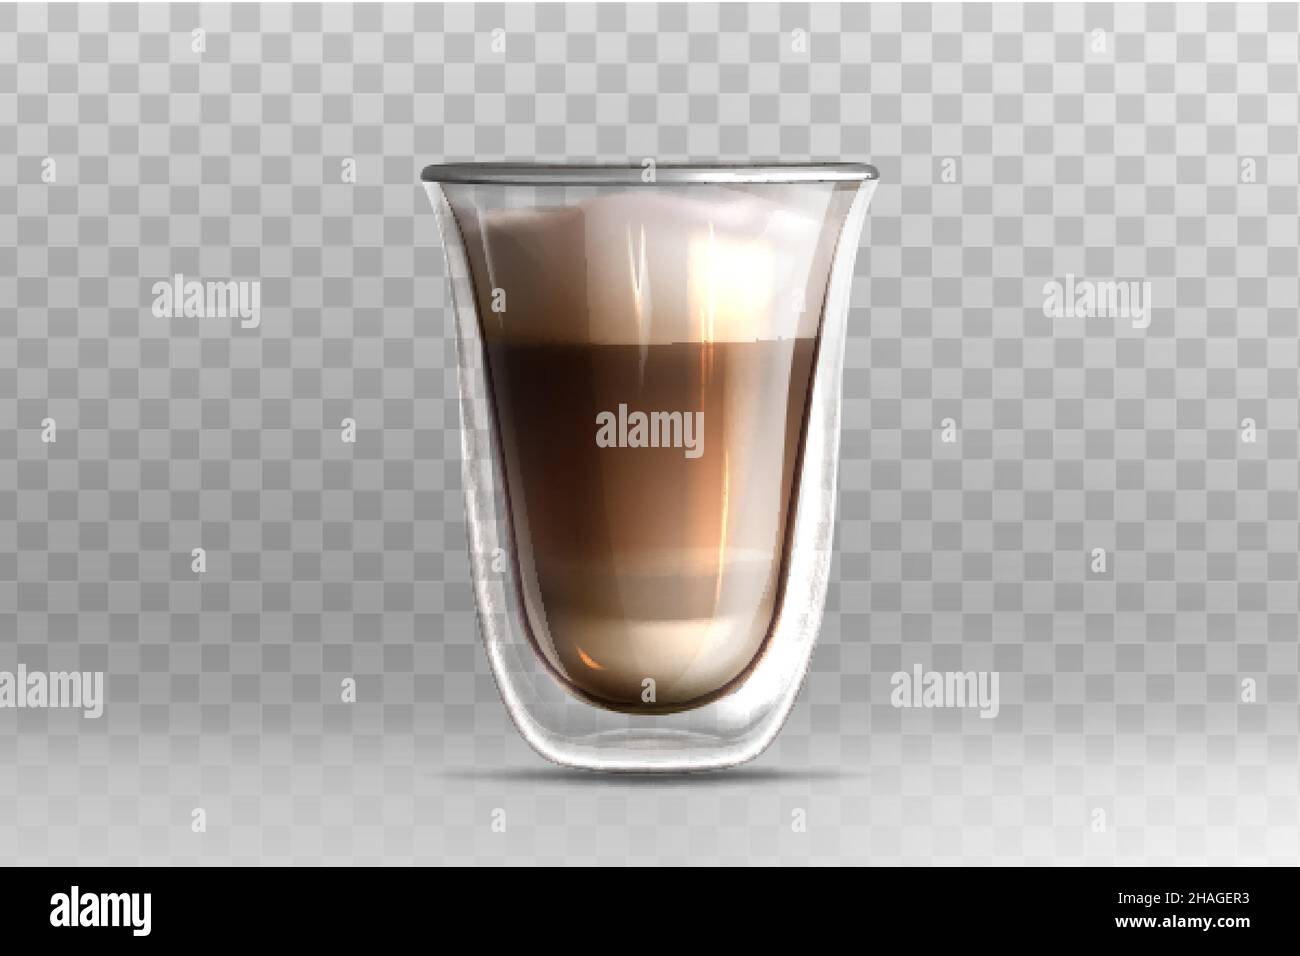 https://c8.alamy.com/comp/2HAGER3/realistic-vector-illustratin-of-coffee-latte-in-glass-cup-with-double-walled-on-transparent-background-cappuccino-drink-with-milk-foam-on-top-mockup-template-for-branding-or-product-design-2HAGER3.jpg